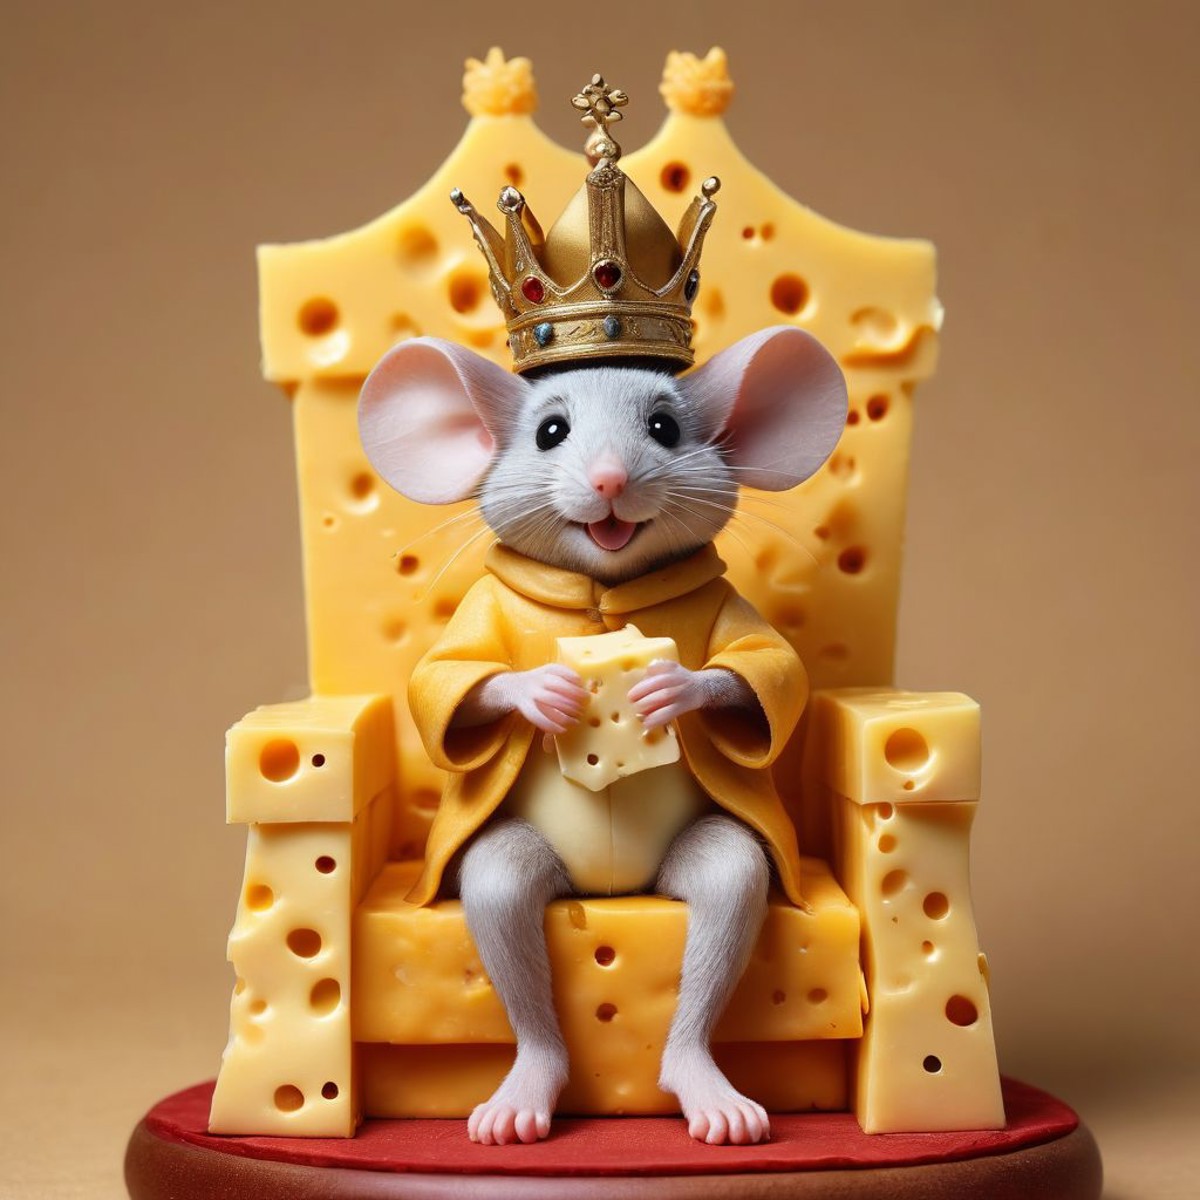 mouse king sitting on throne made of cheese